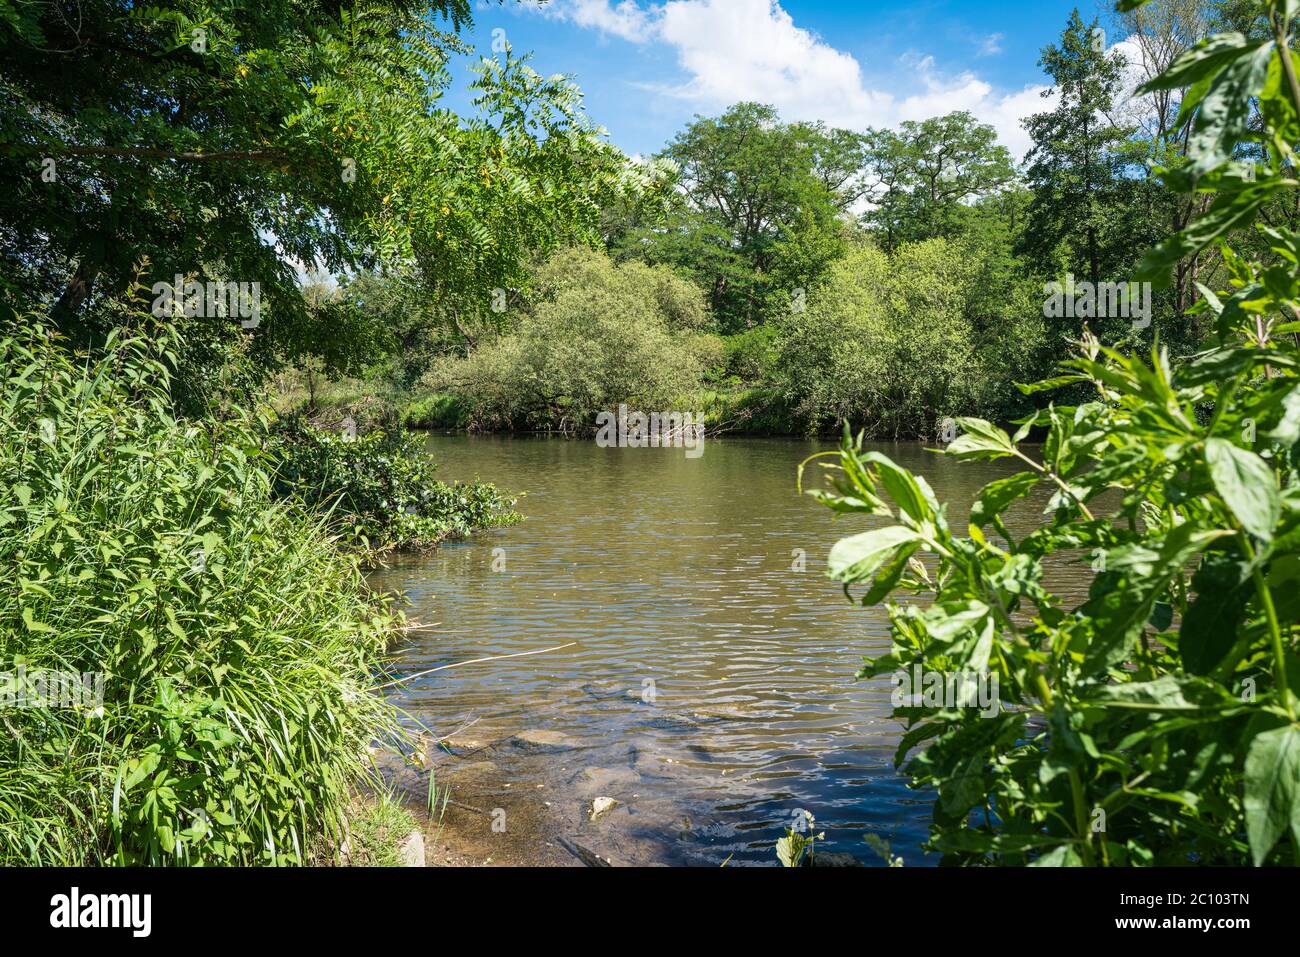 View across the river Agger to the opposite bank. A scene on a beautiful early summer day. Stock Photo